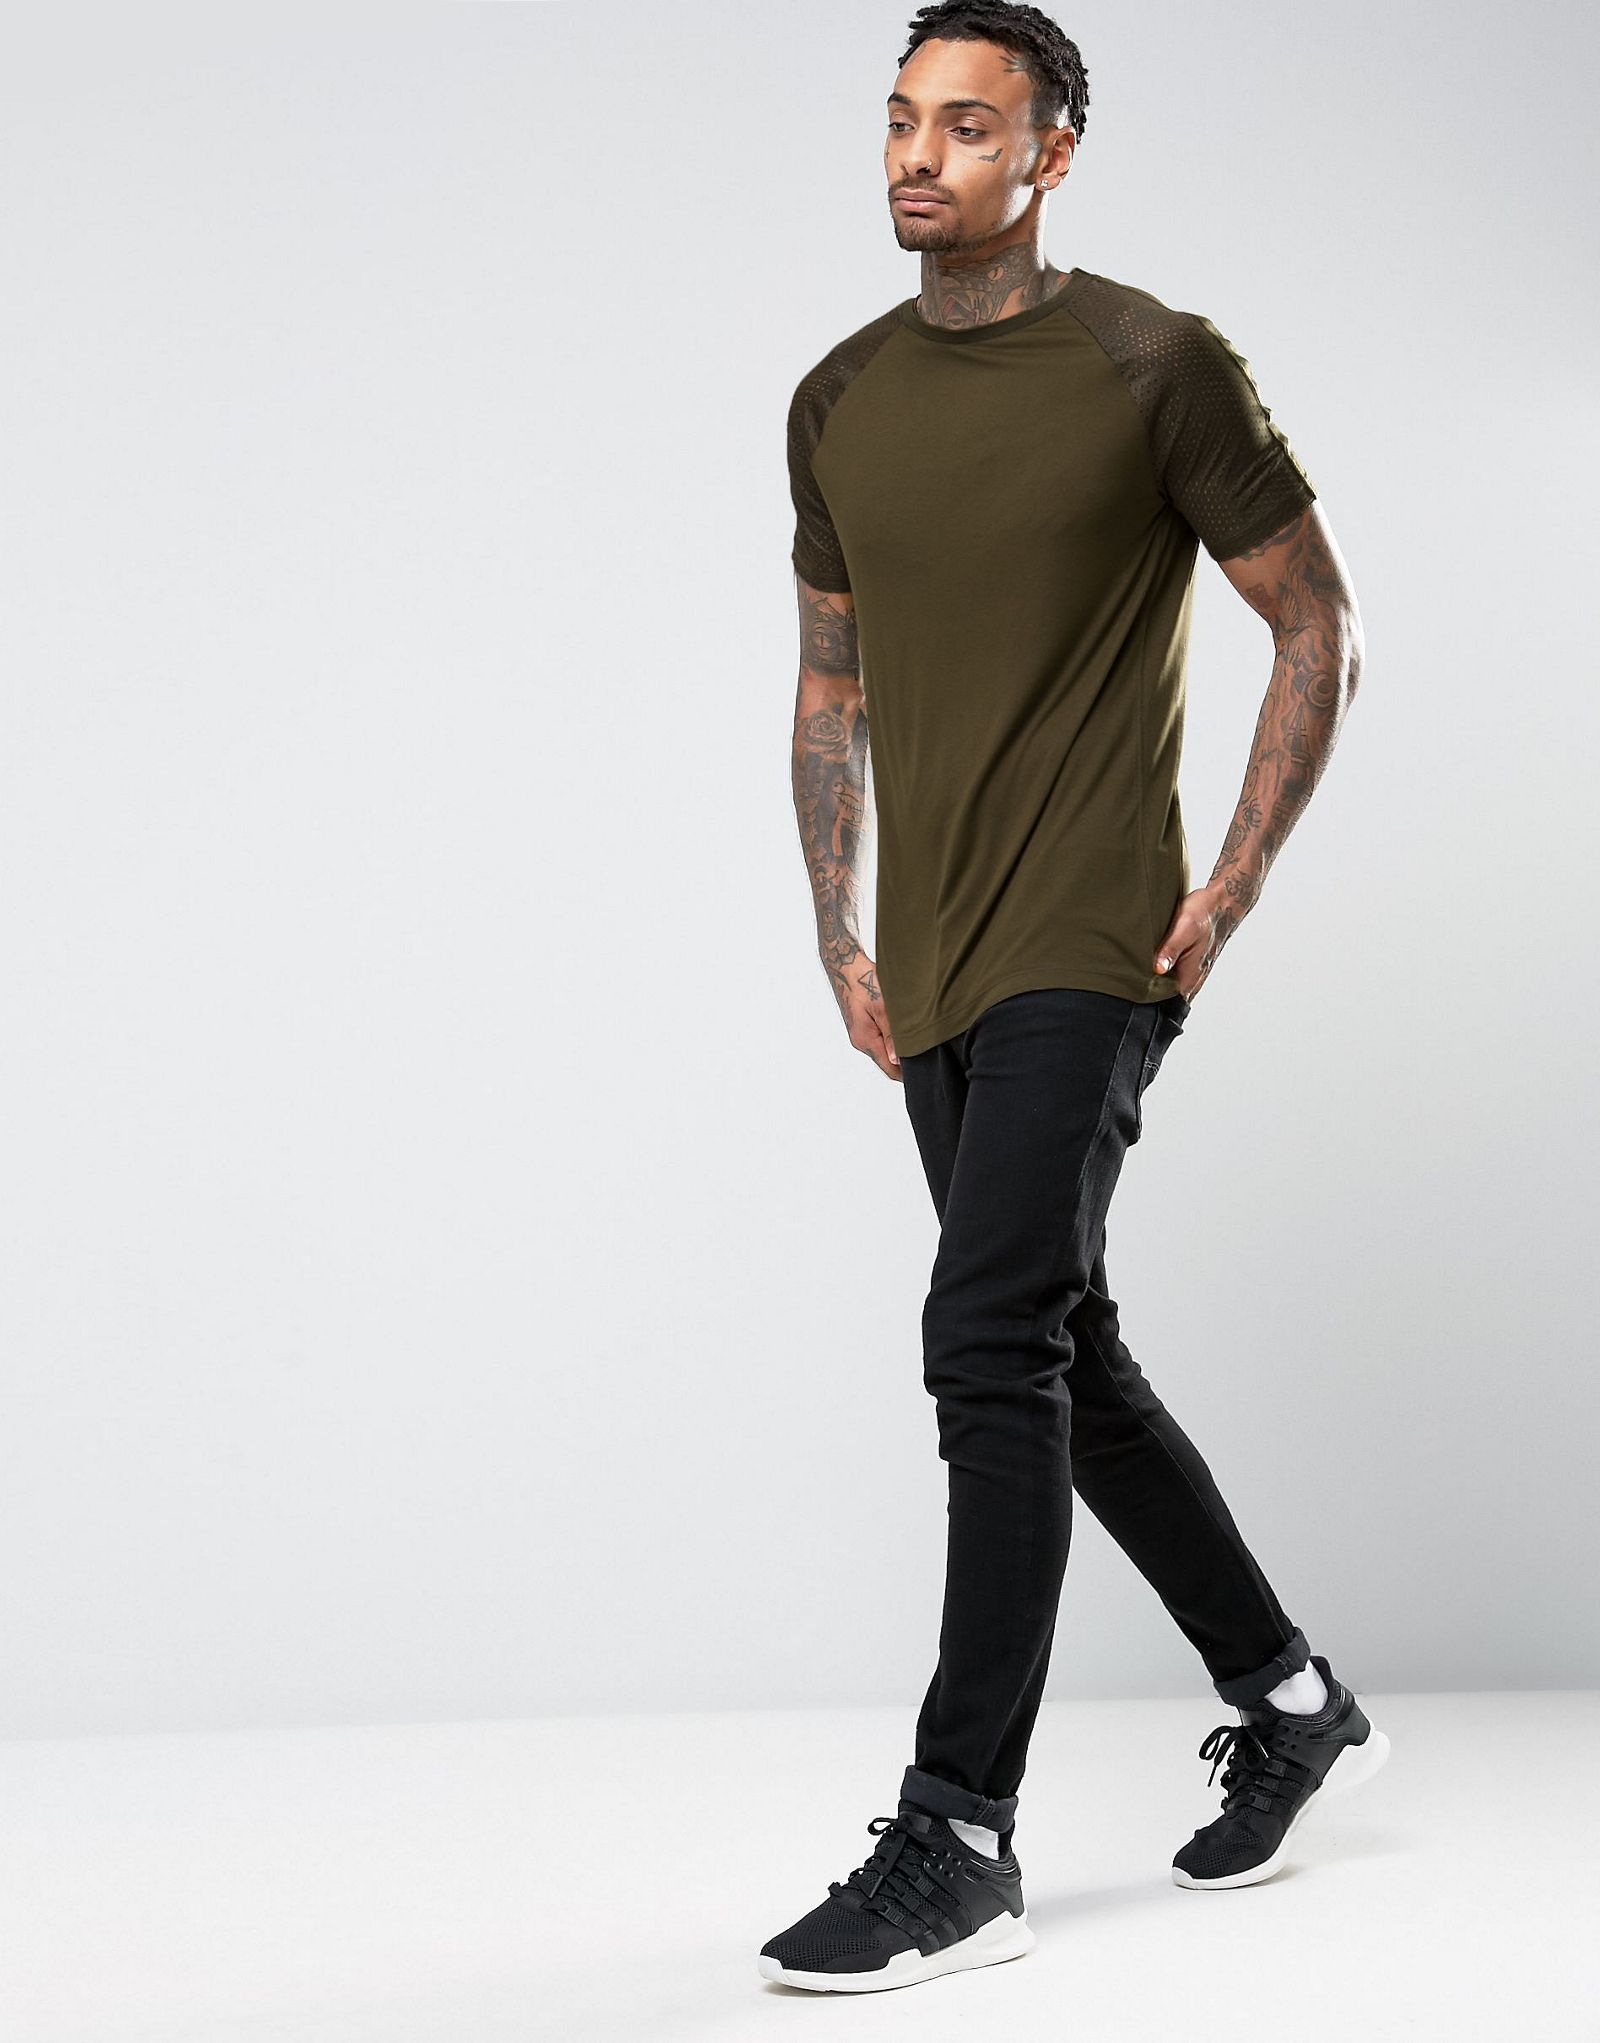 River Island T-Shirt With Perforated Sleeves In Khaki